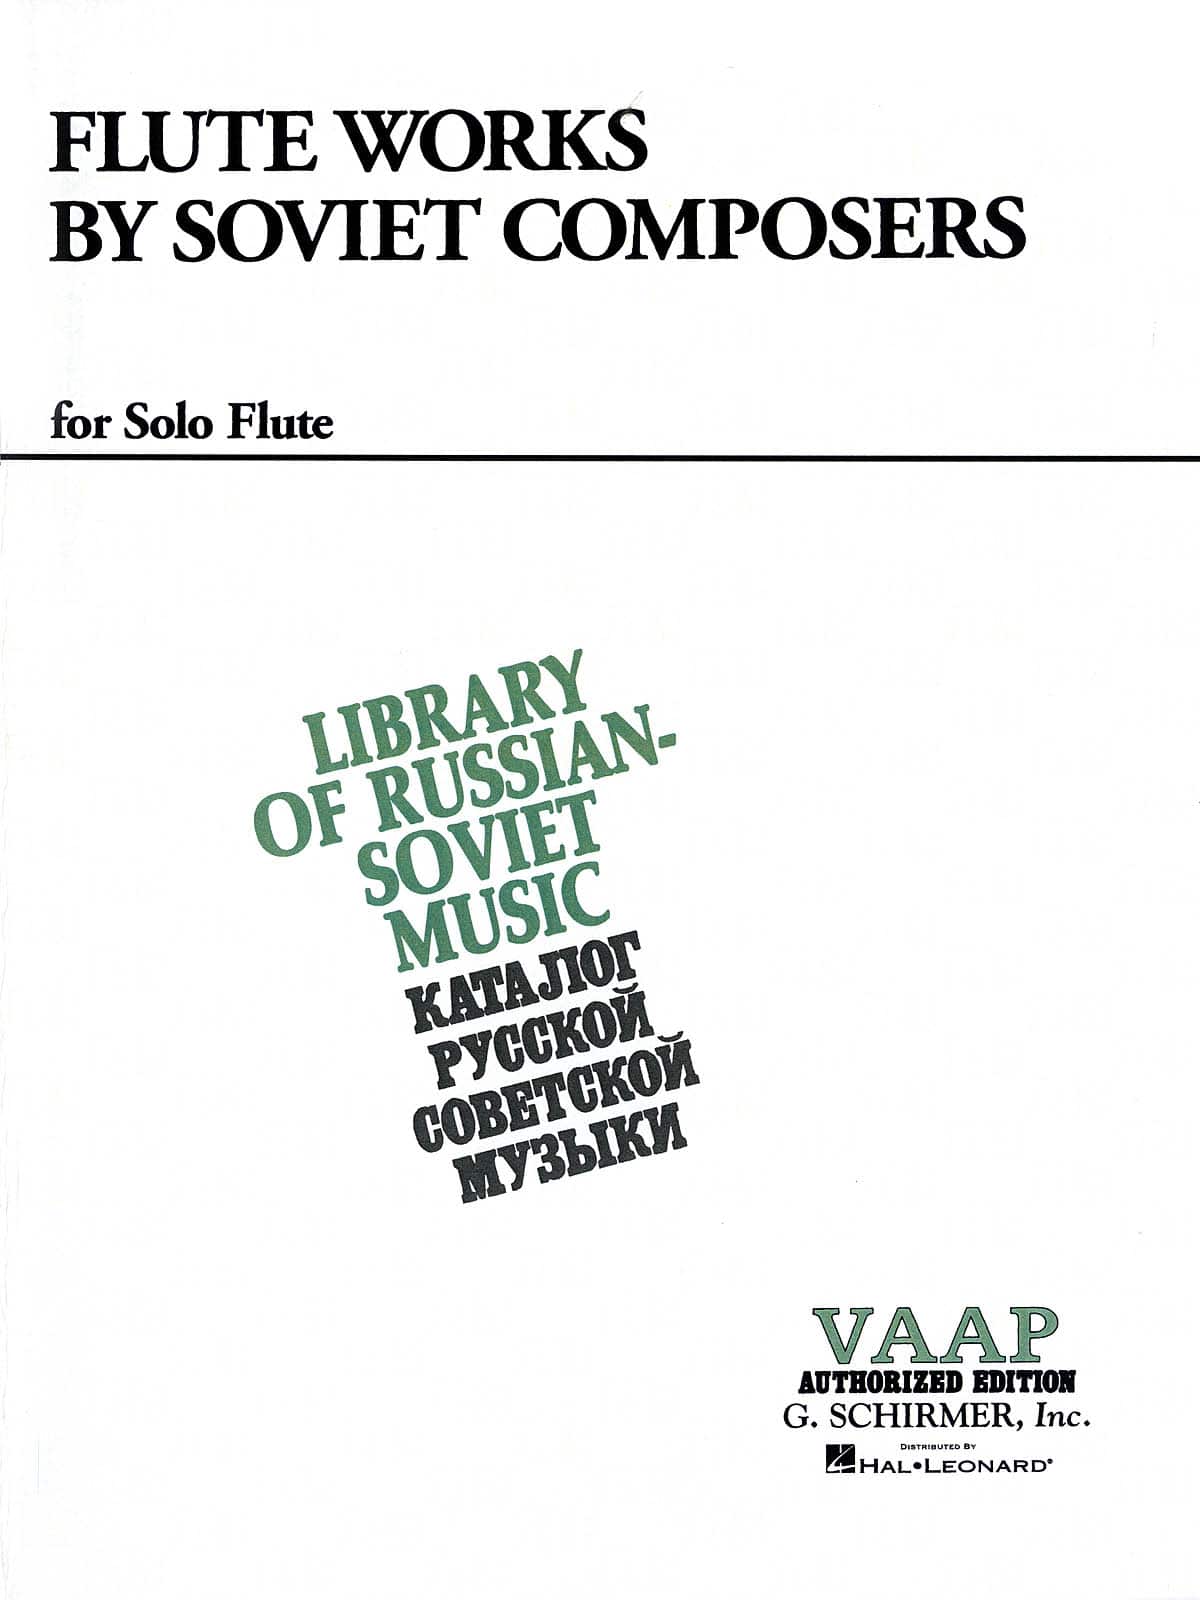 SCHIRMER FLUTE WORKS BY SOVIET COMPOSERS - FLUTE & PIANO